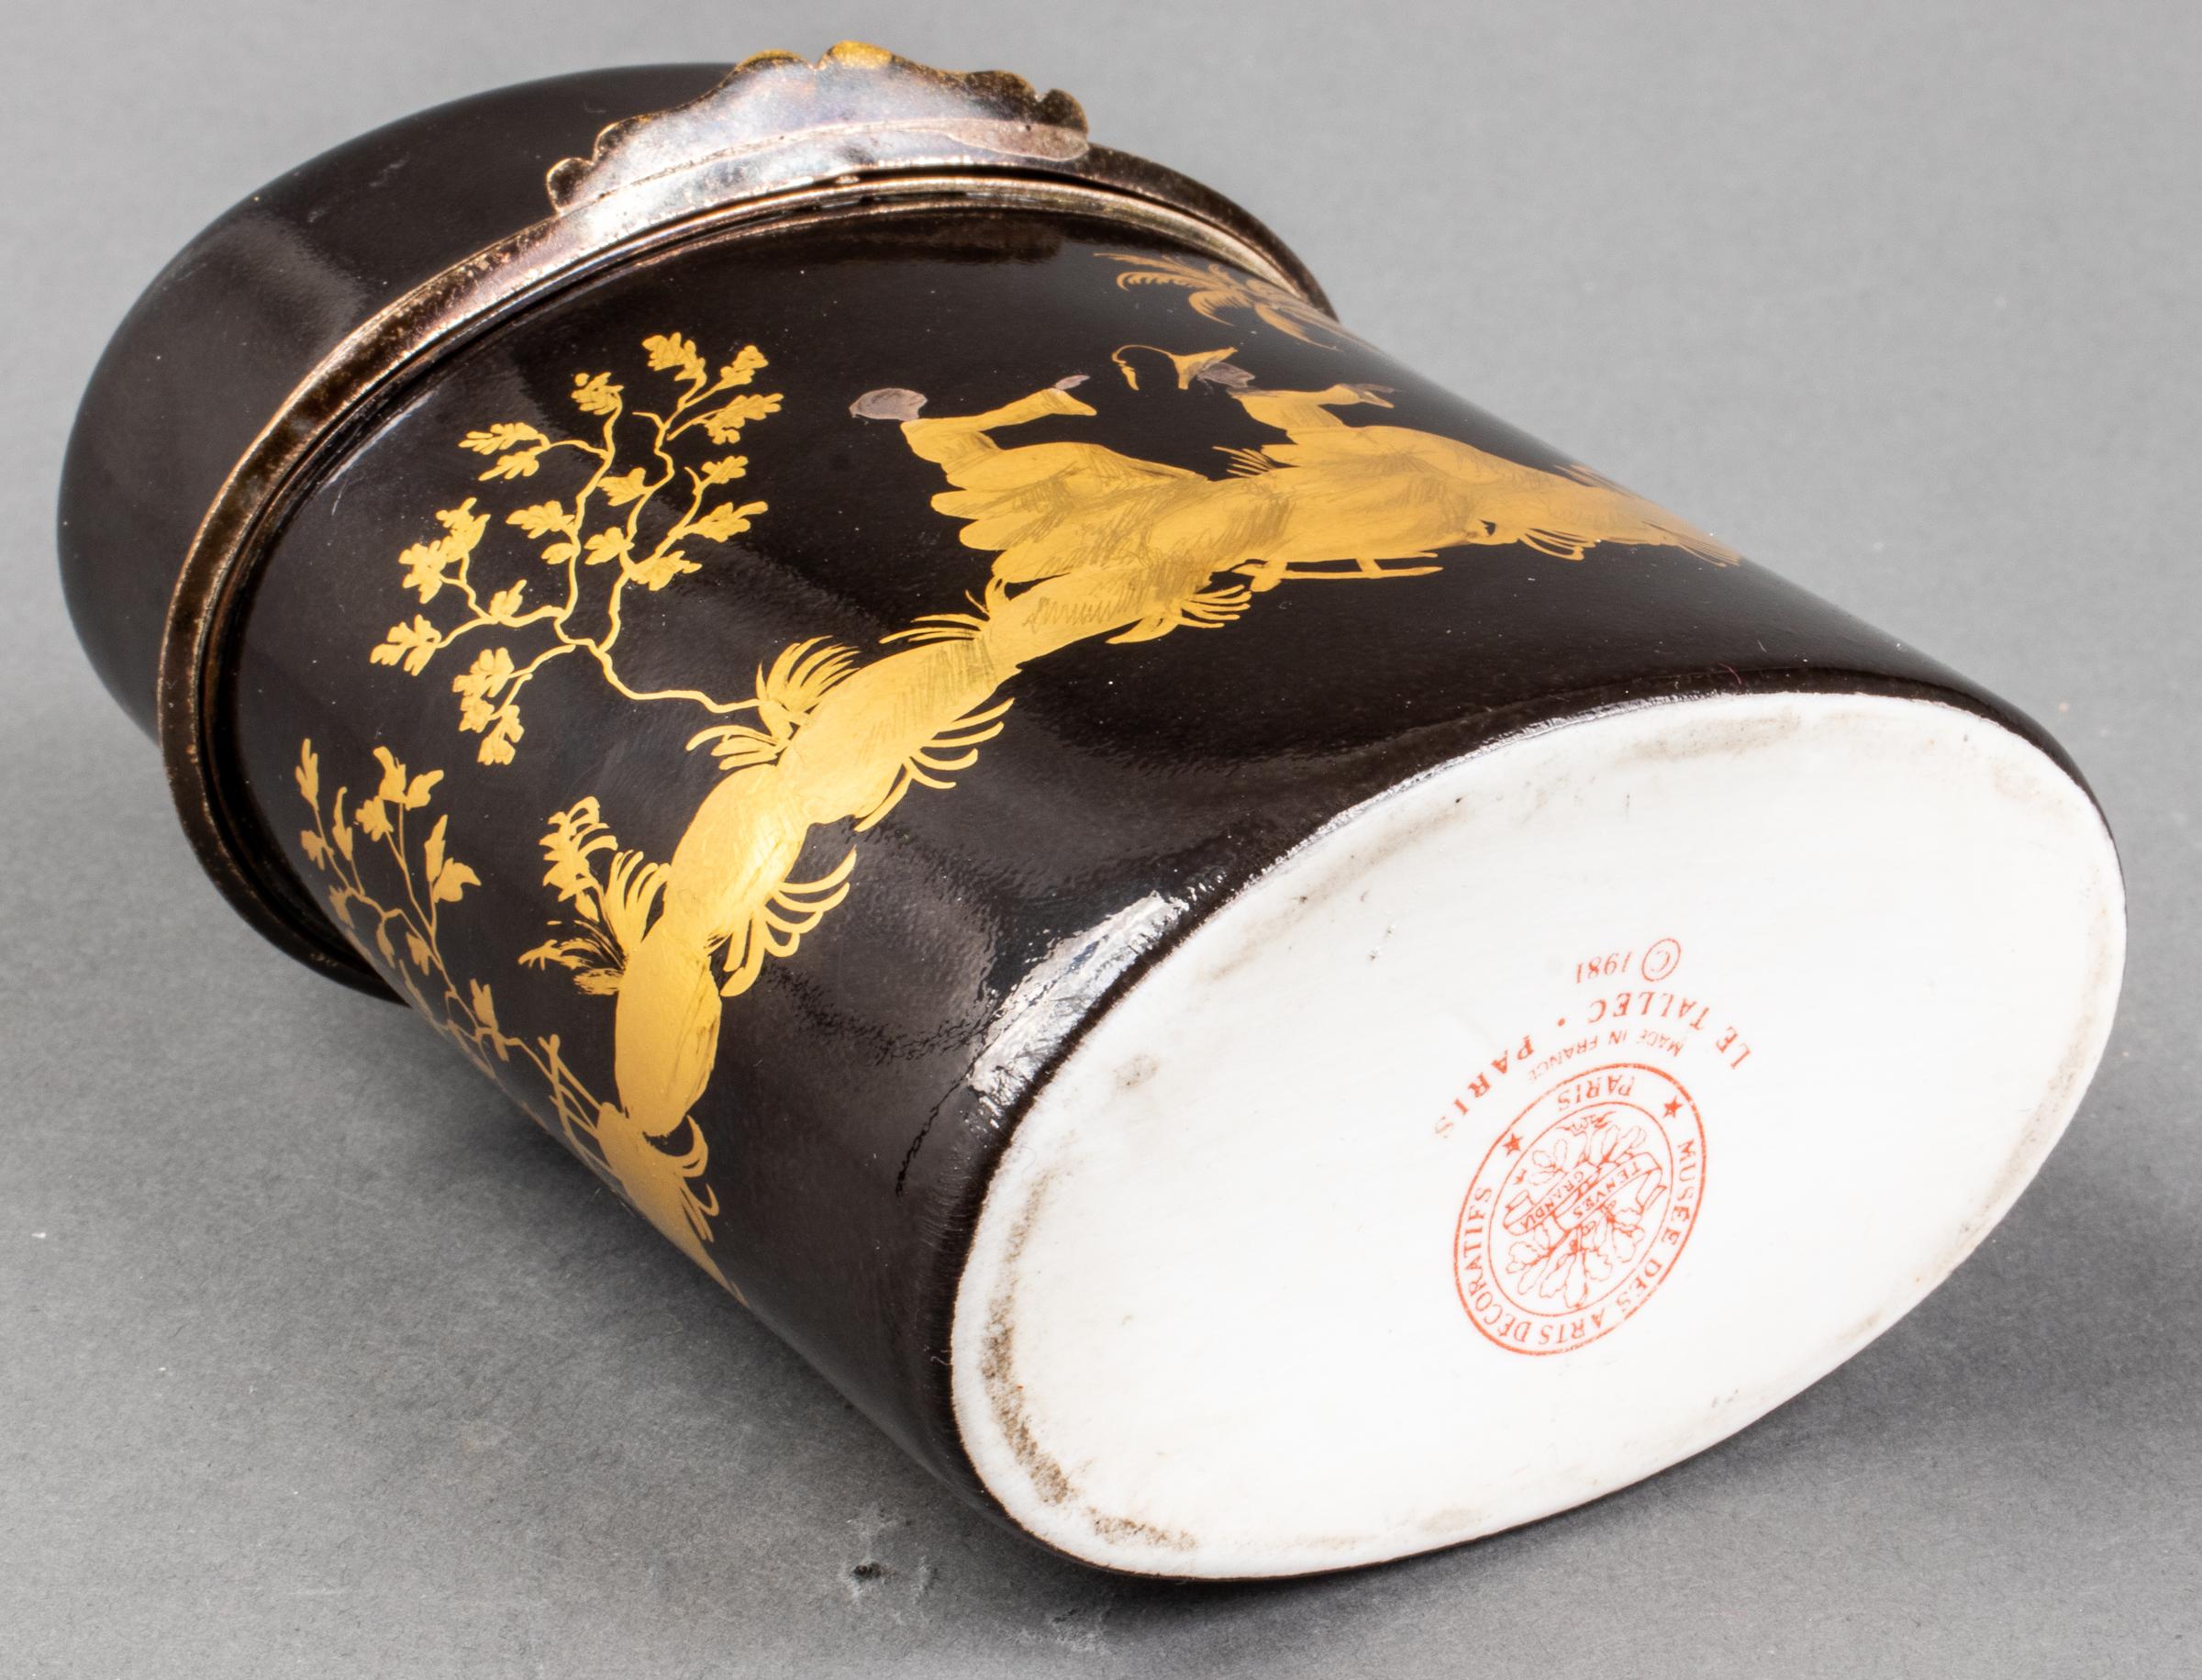 Atelier Camille Le Tallec Paris hand painted and gilt decorated black porcelain box, circa 1981, probably from the Cirque Chinois pattern, of oval form and throughout with chinoiserie scenes and decorations, marked to base 